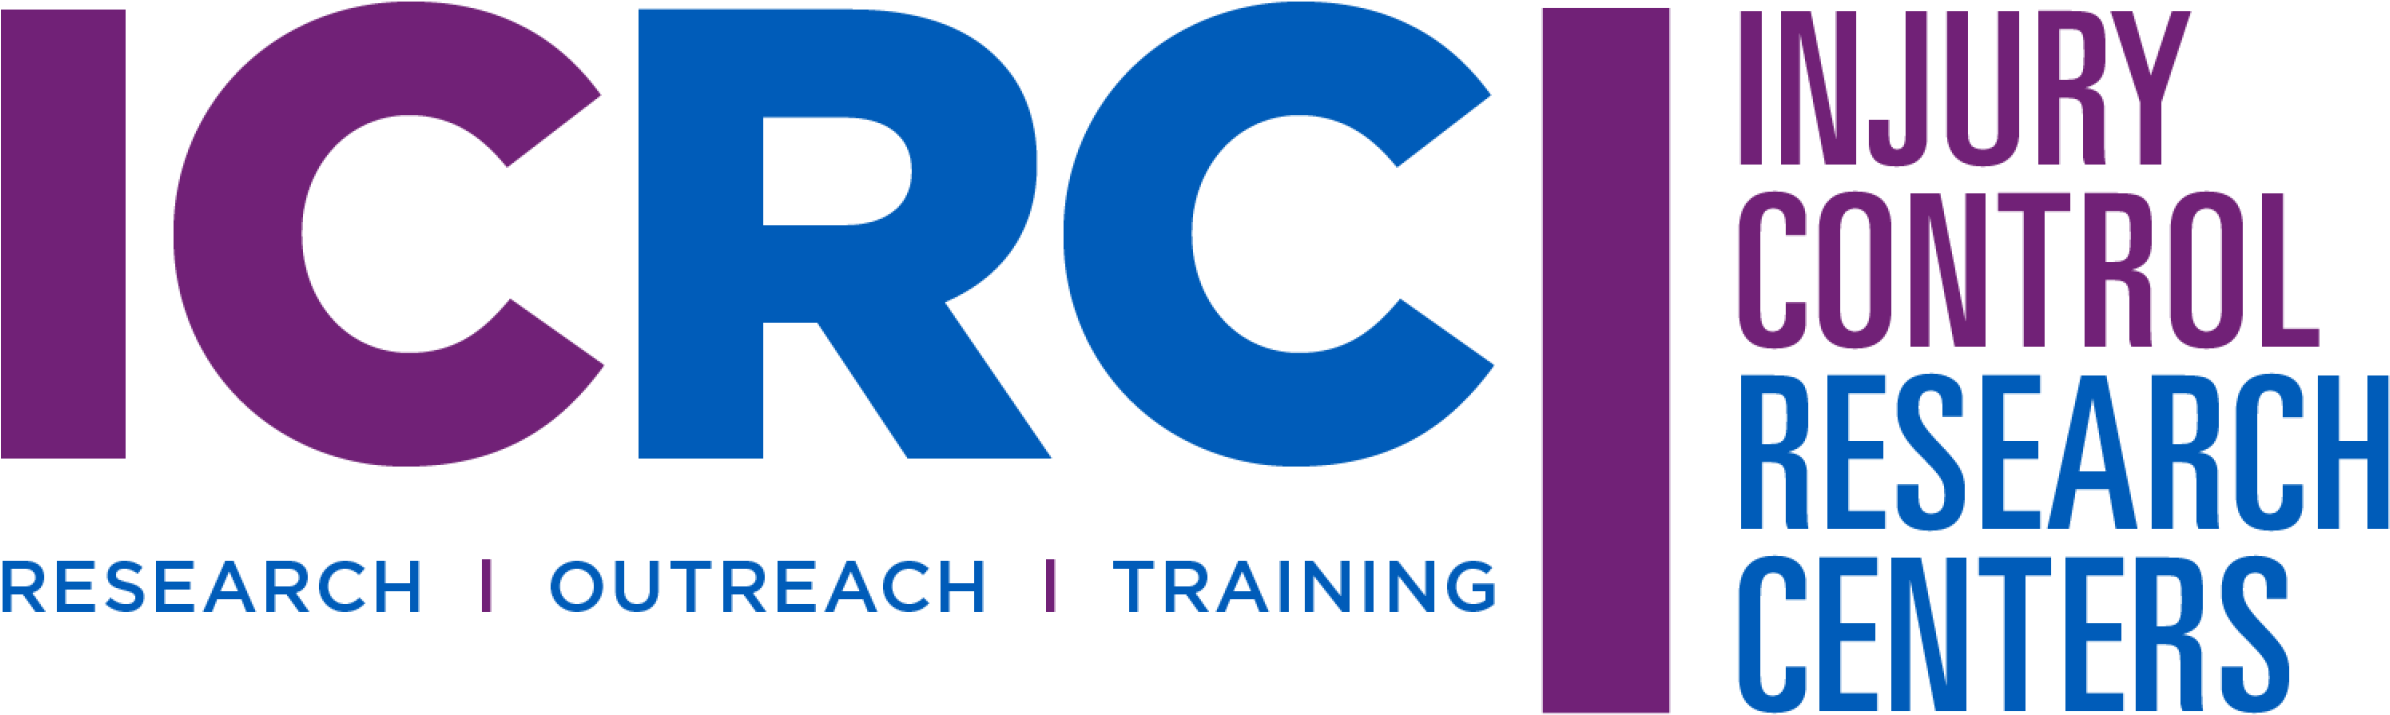 About Cdc's Icrcs - Ovarian Cancer Research Foundation (2400x767), Png Download